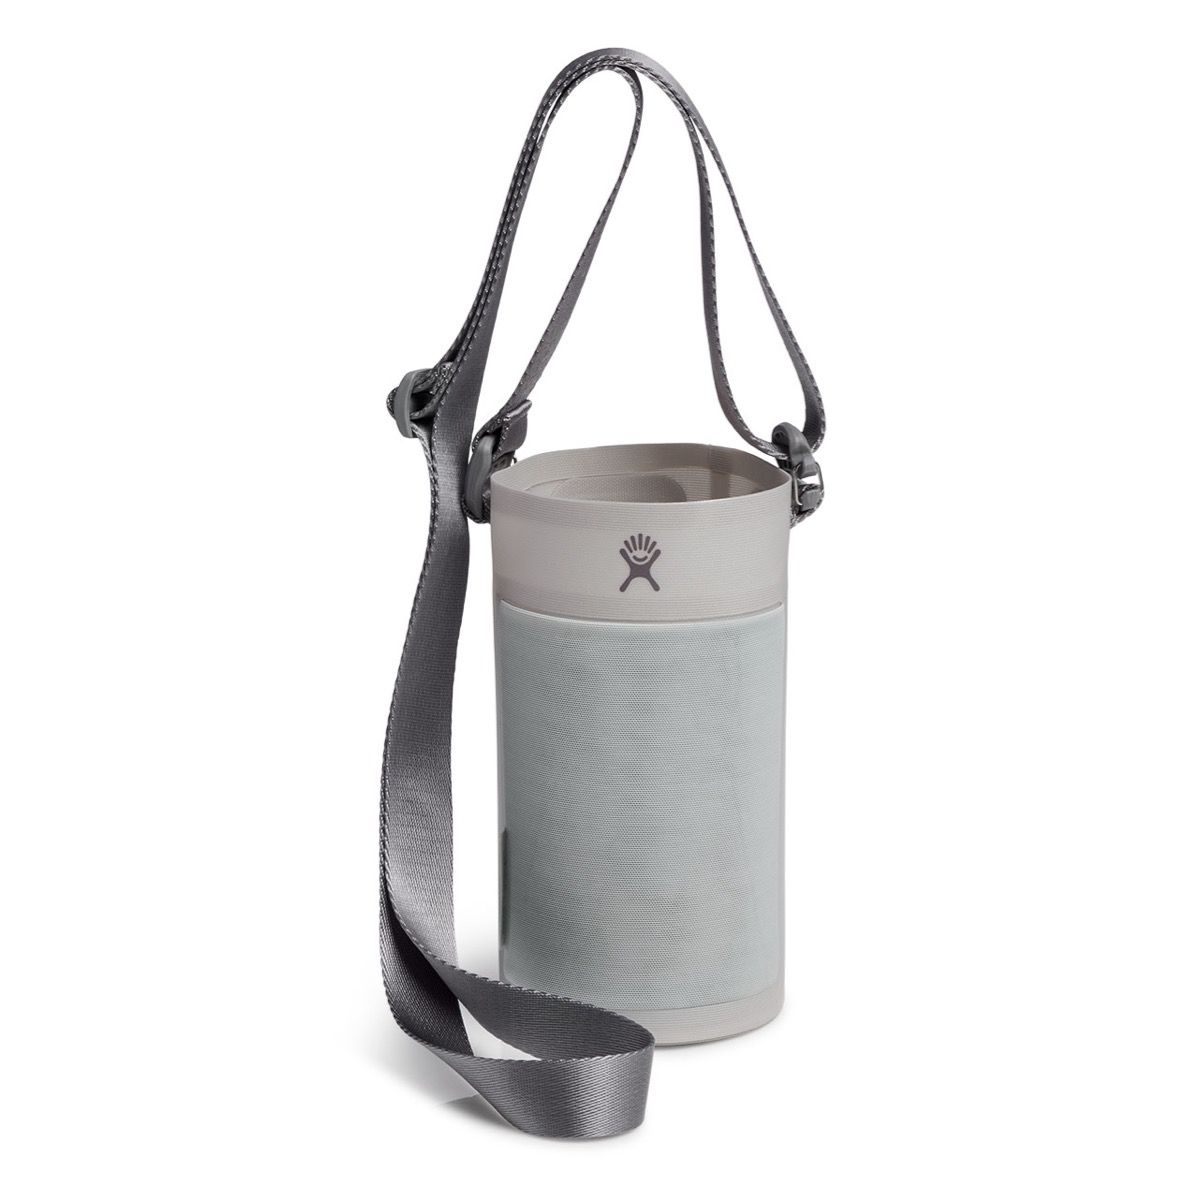 New Product】Hydroflask Bottle Sling (S size)